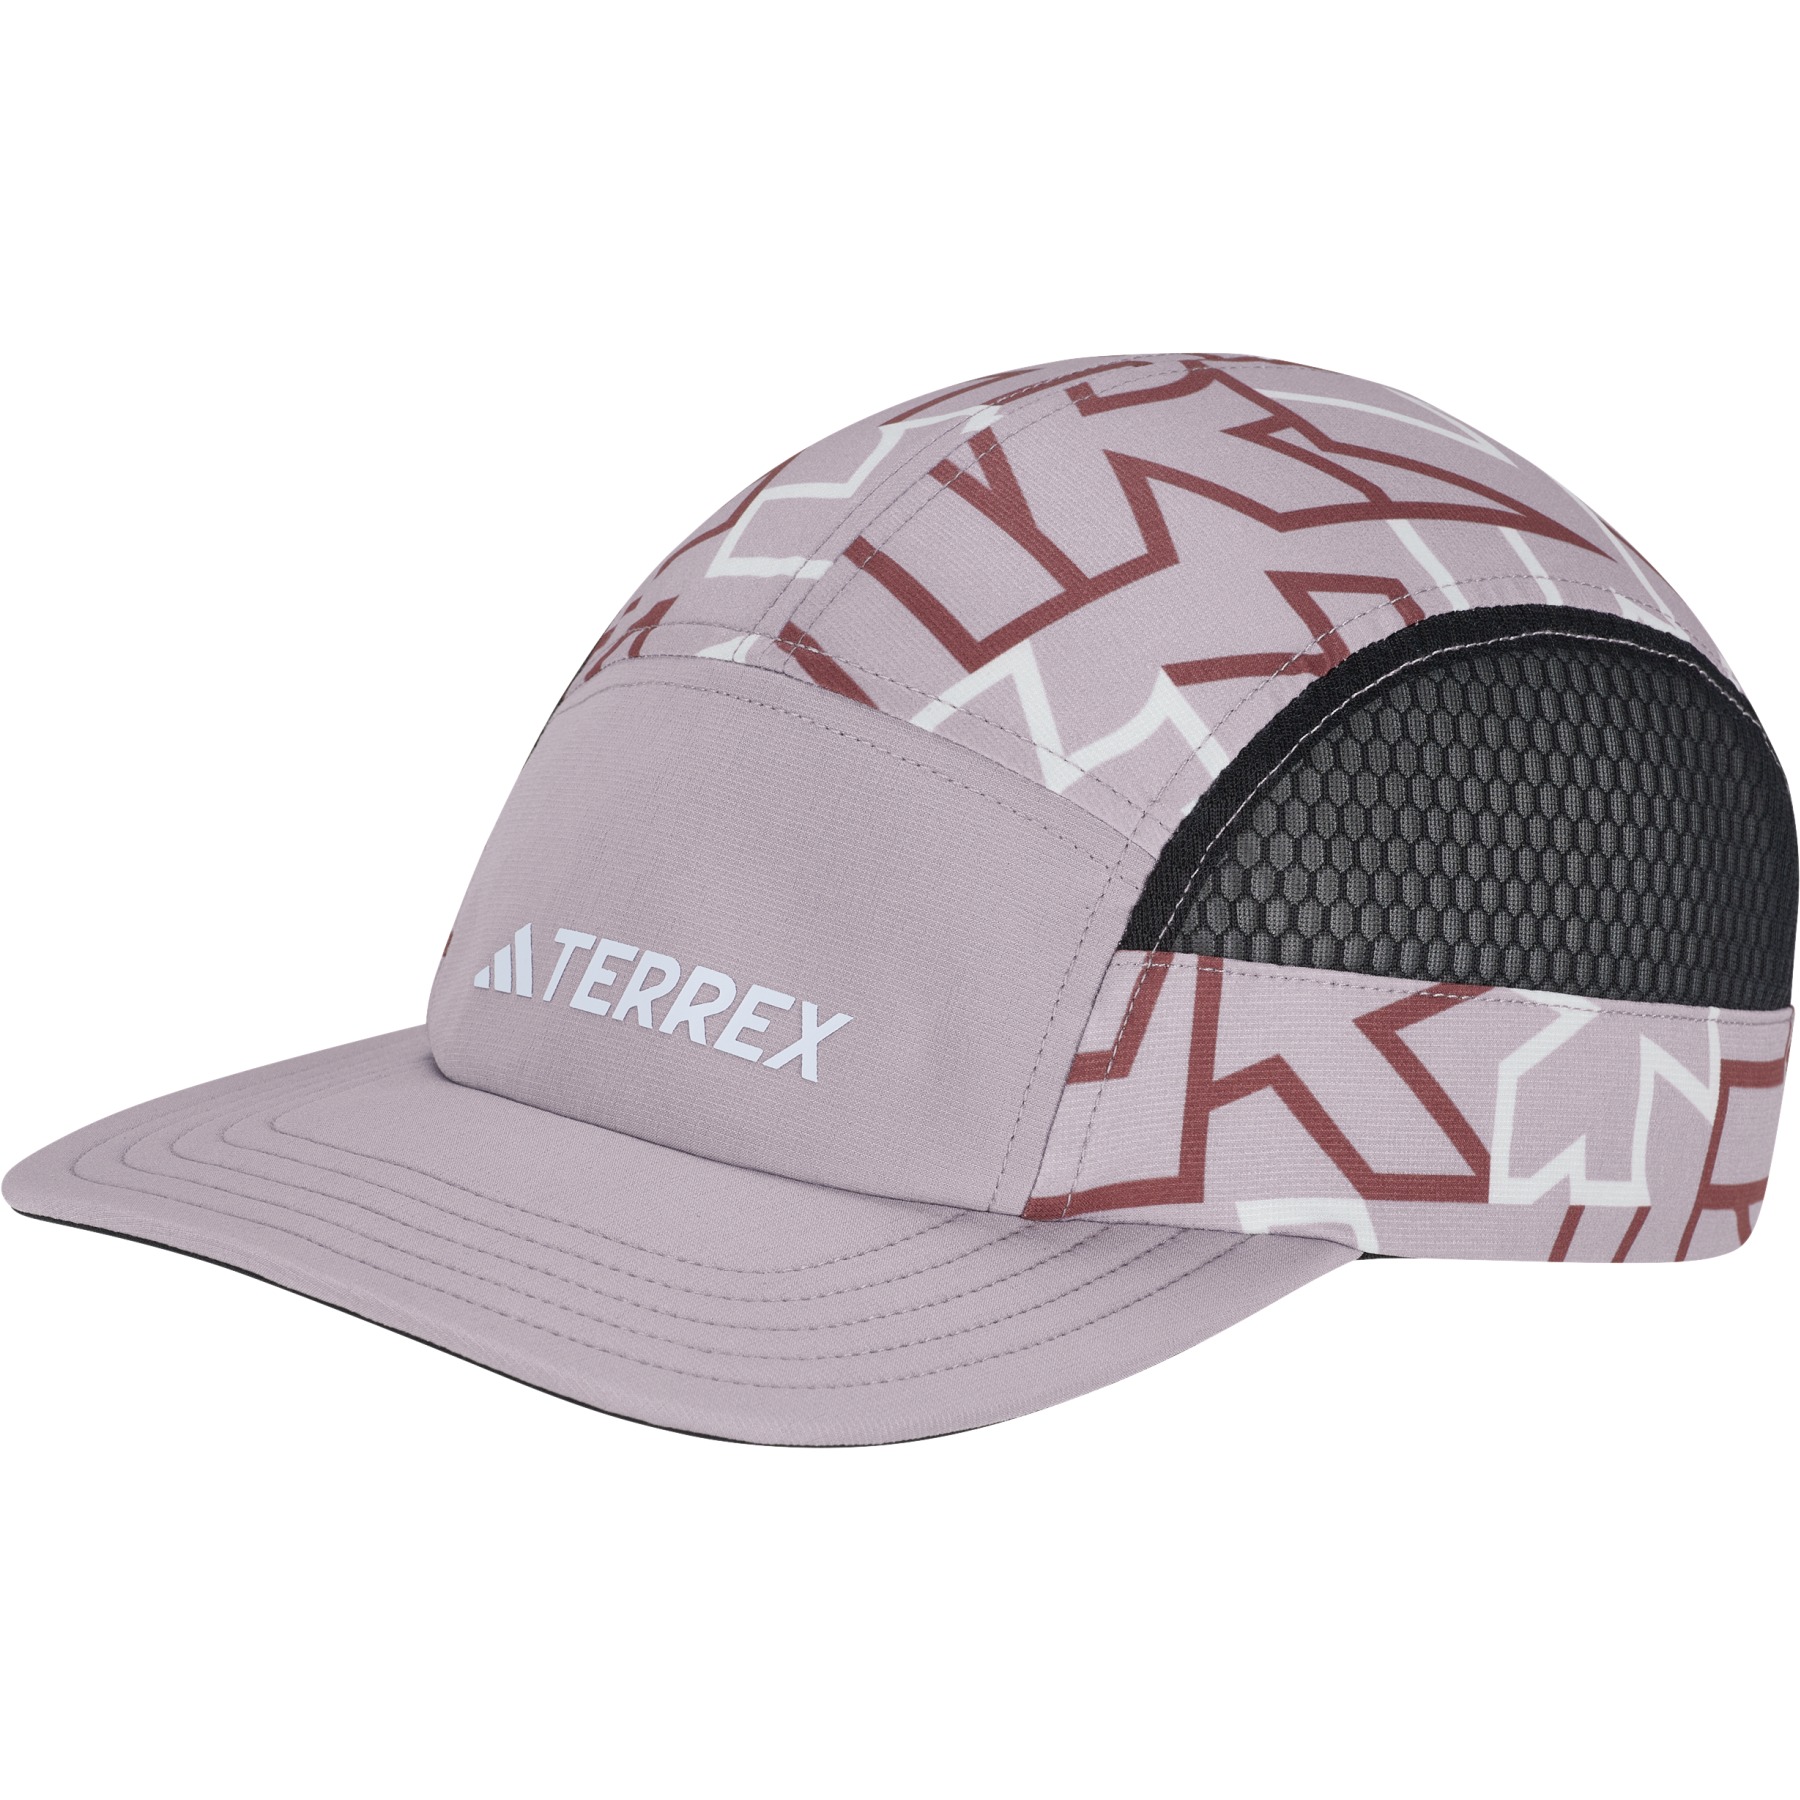 Picture of adidas TERREX HEAT.RDY 5-Panel Graphic Cap - preloved fig/white/black IN8288